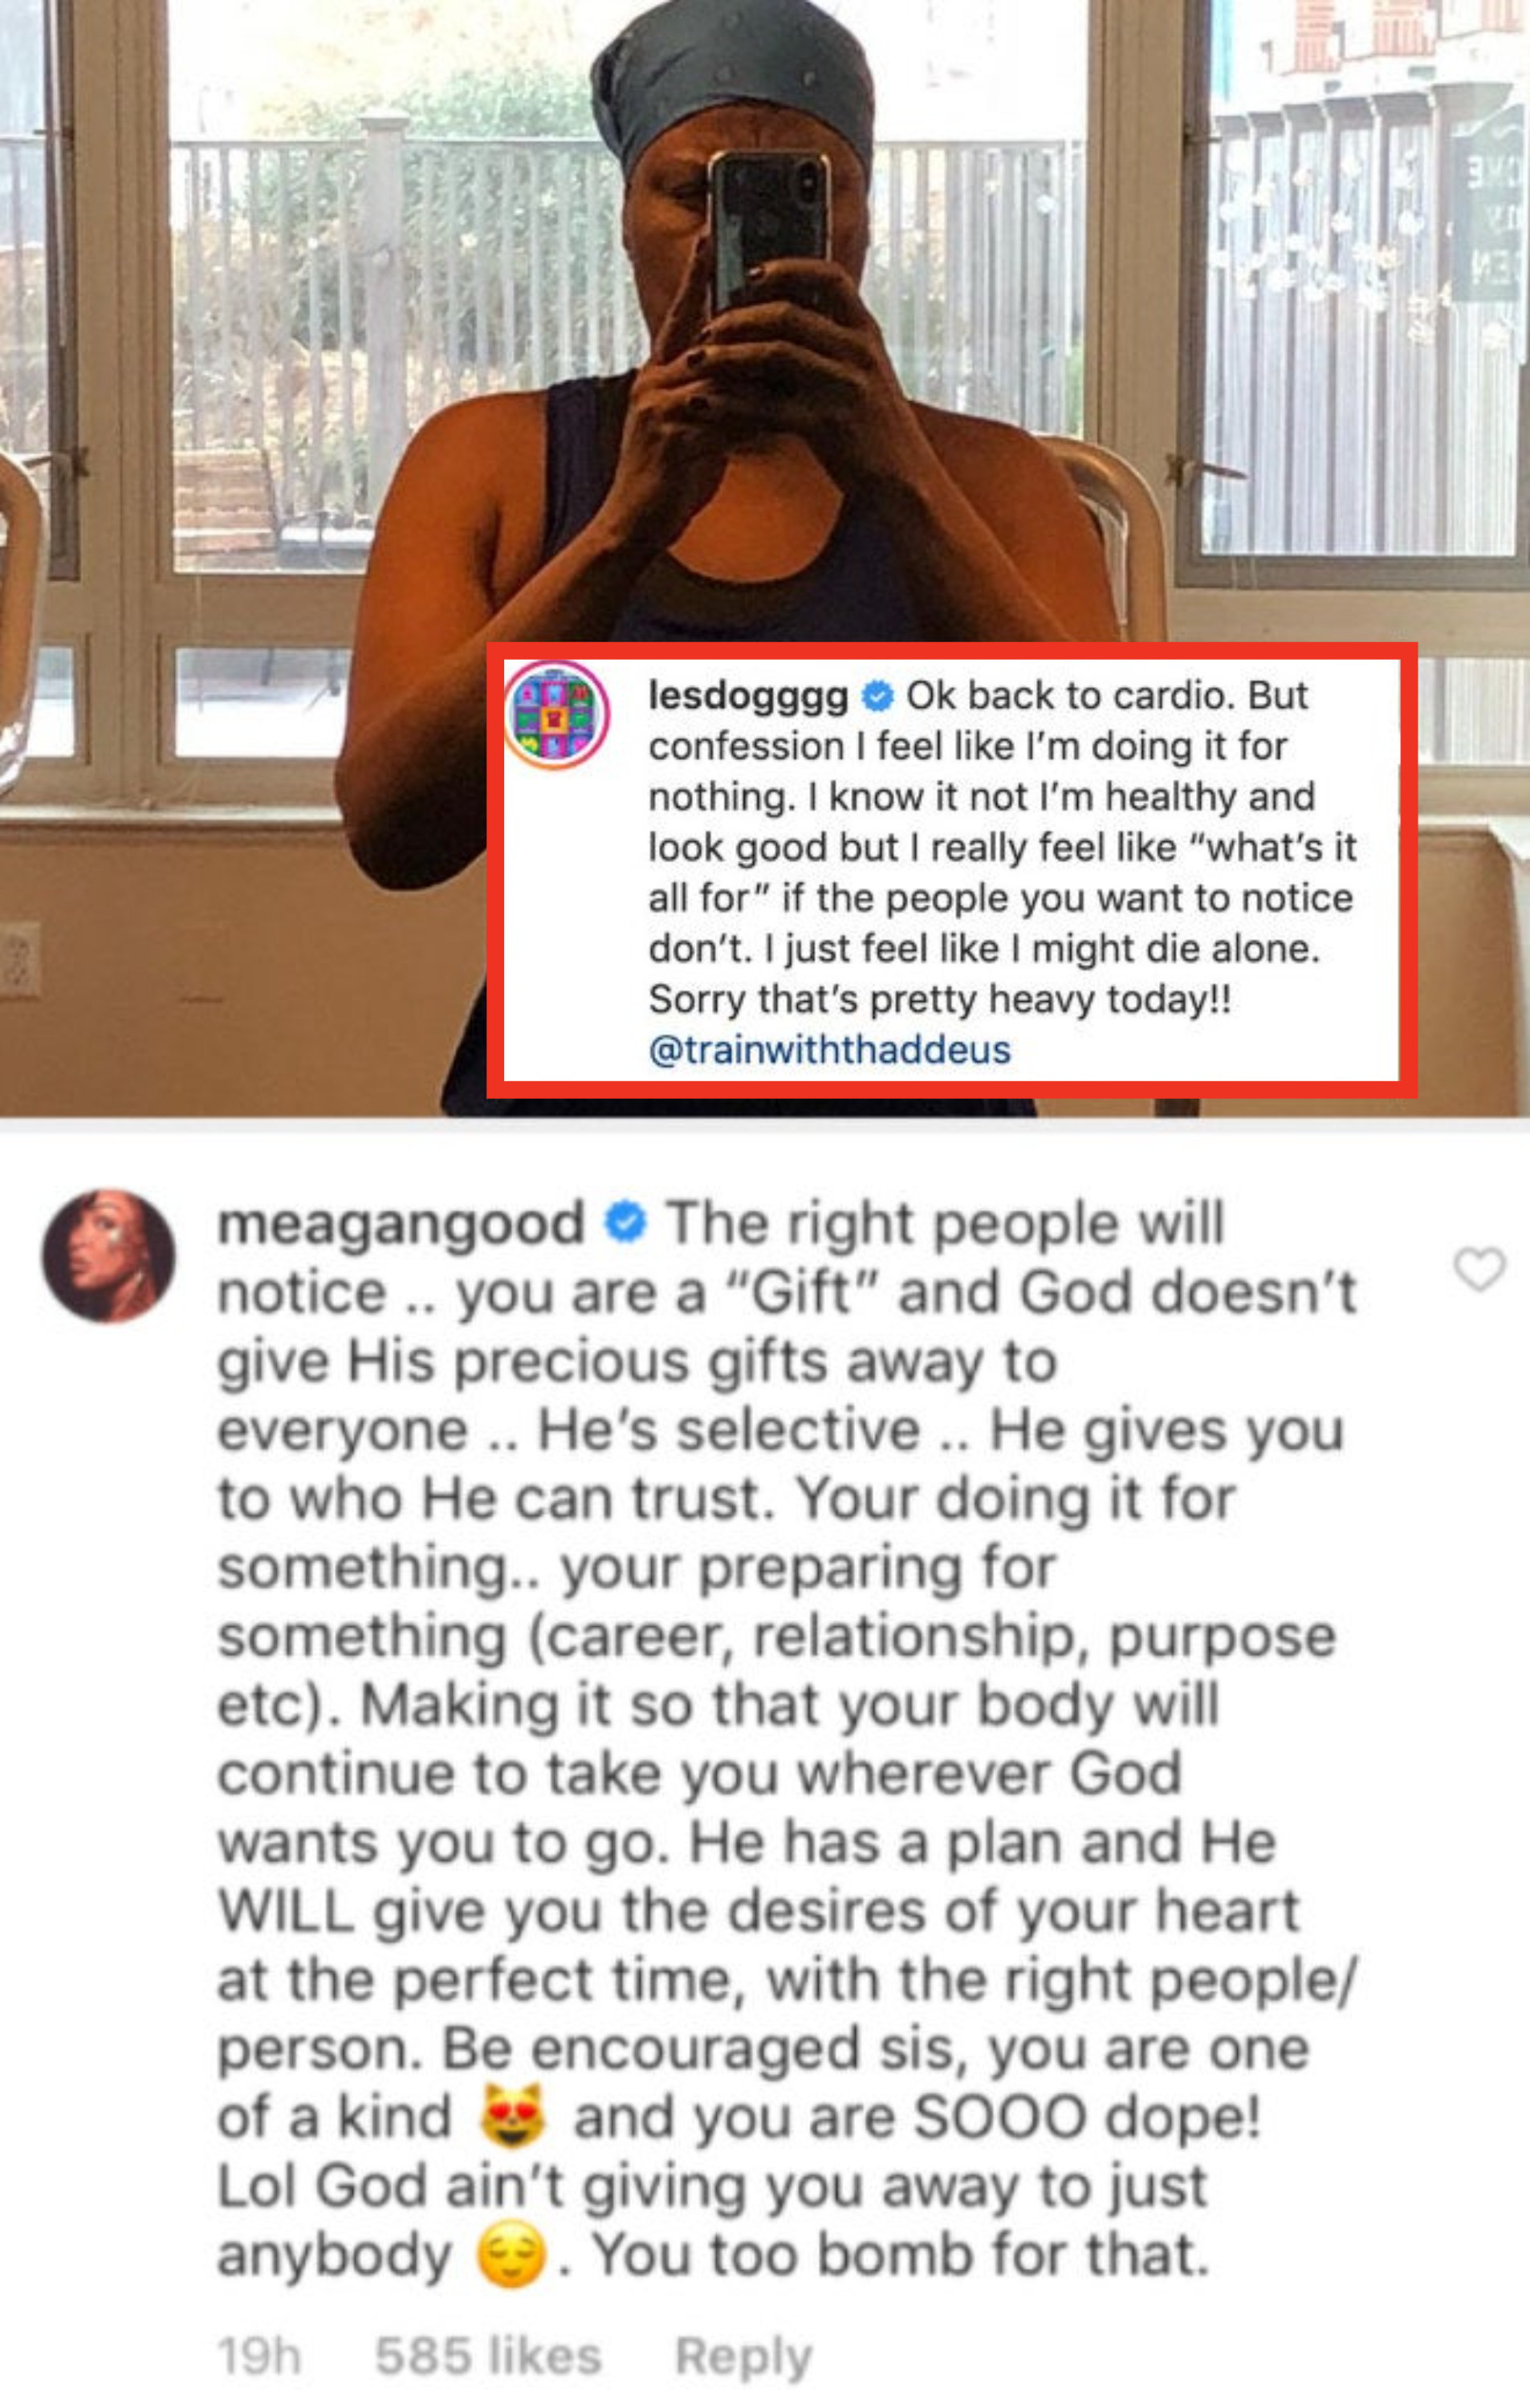 Good telling Jones: &quot;The right people will notice you are a &#x27;Gift.&#x27; You are SOOO dope! God ain&#x27;t giving you away to just anybody. You too bomb for that&quot;